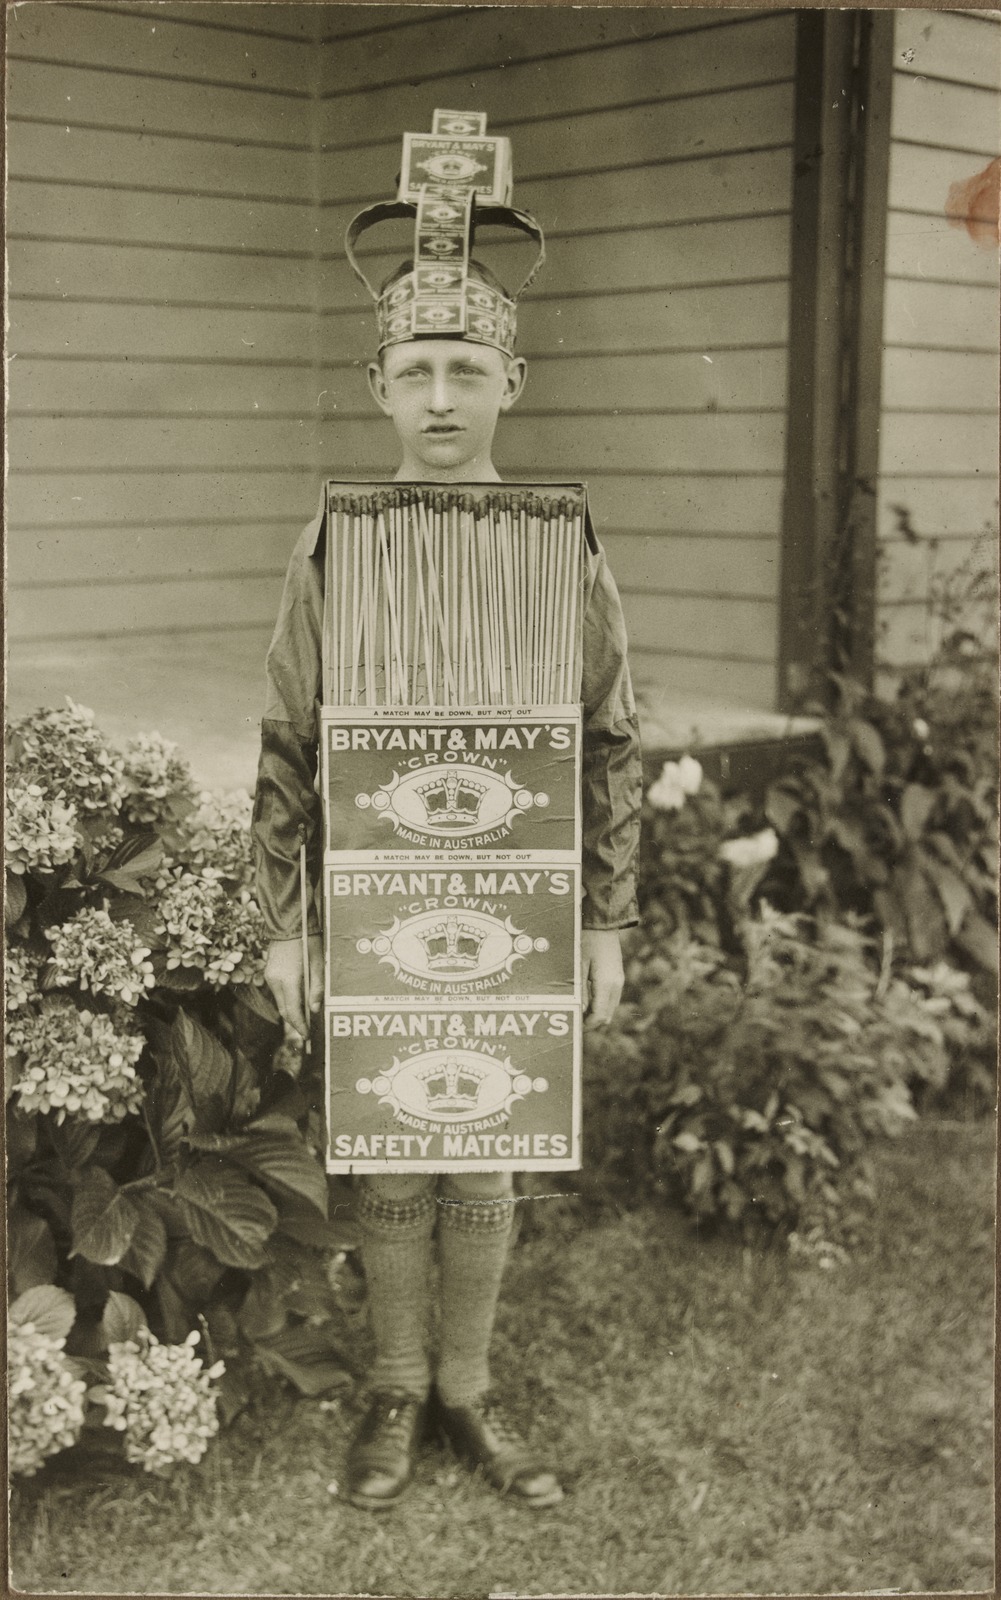 Shows boy in costume depicting Bryant & May's Crown Safety Matches.